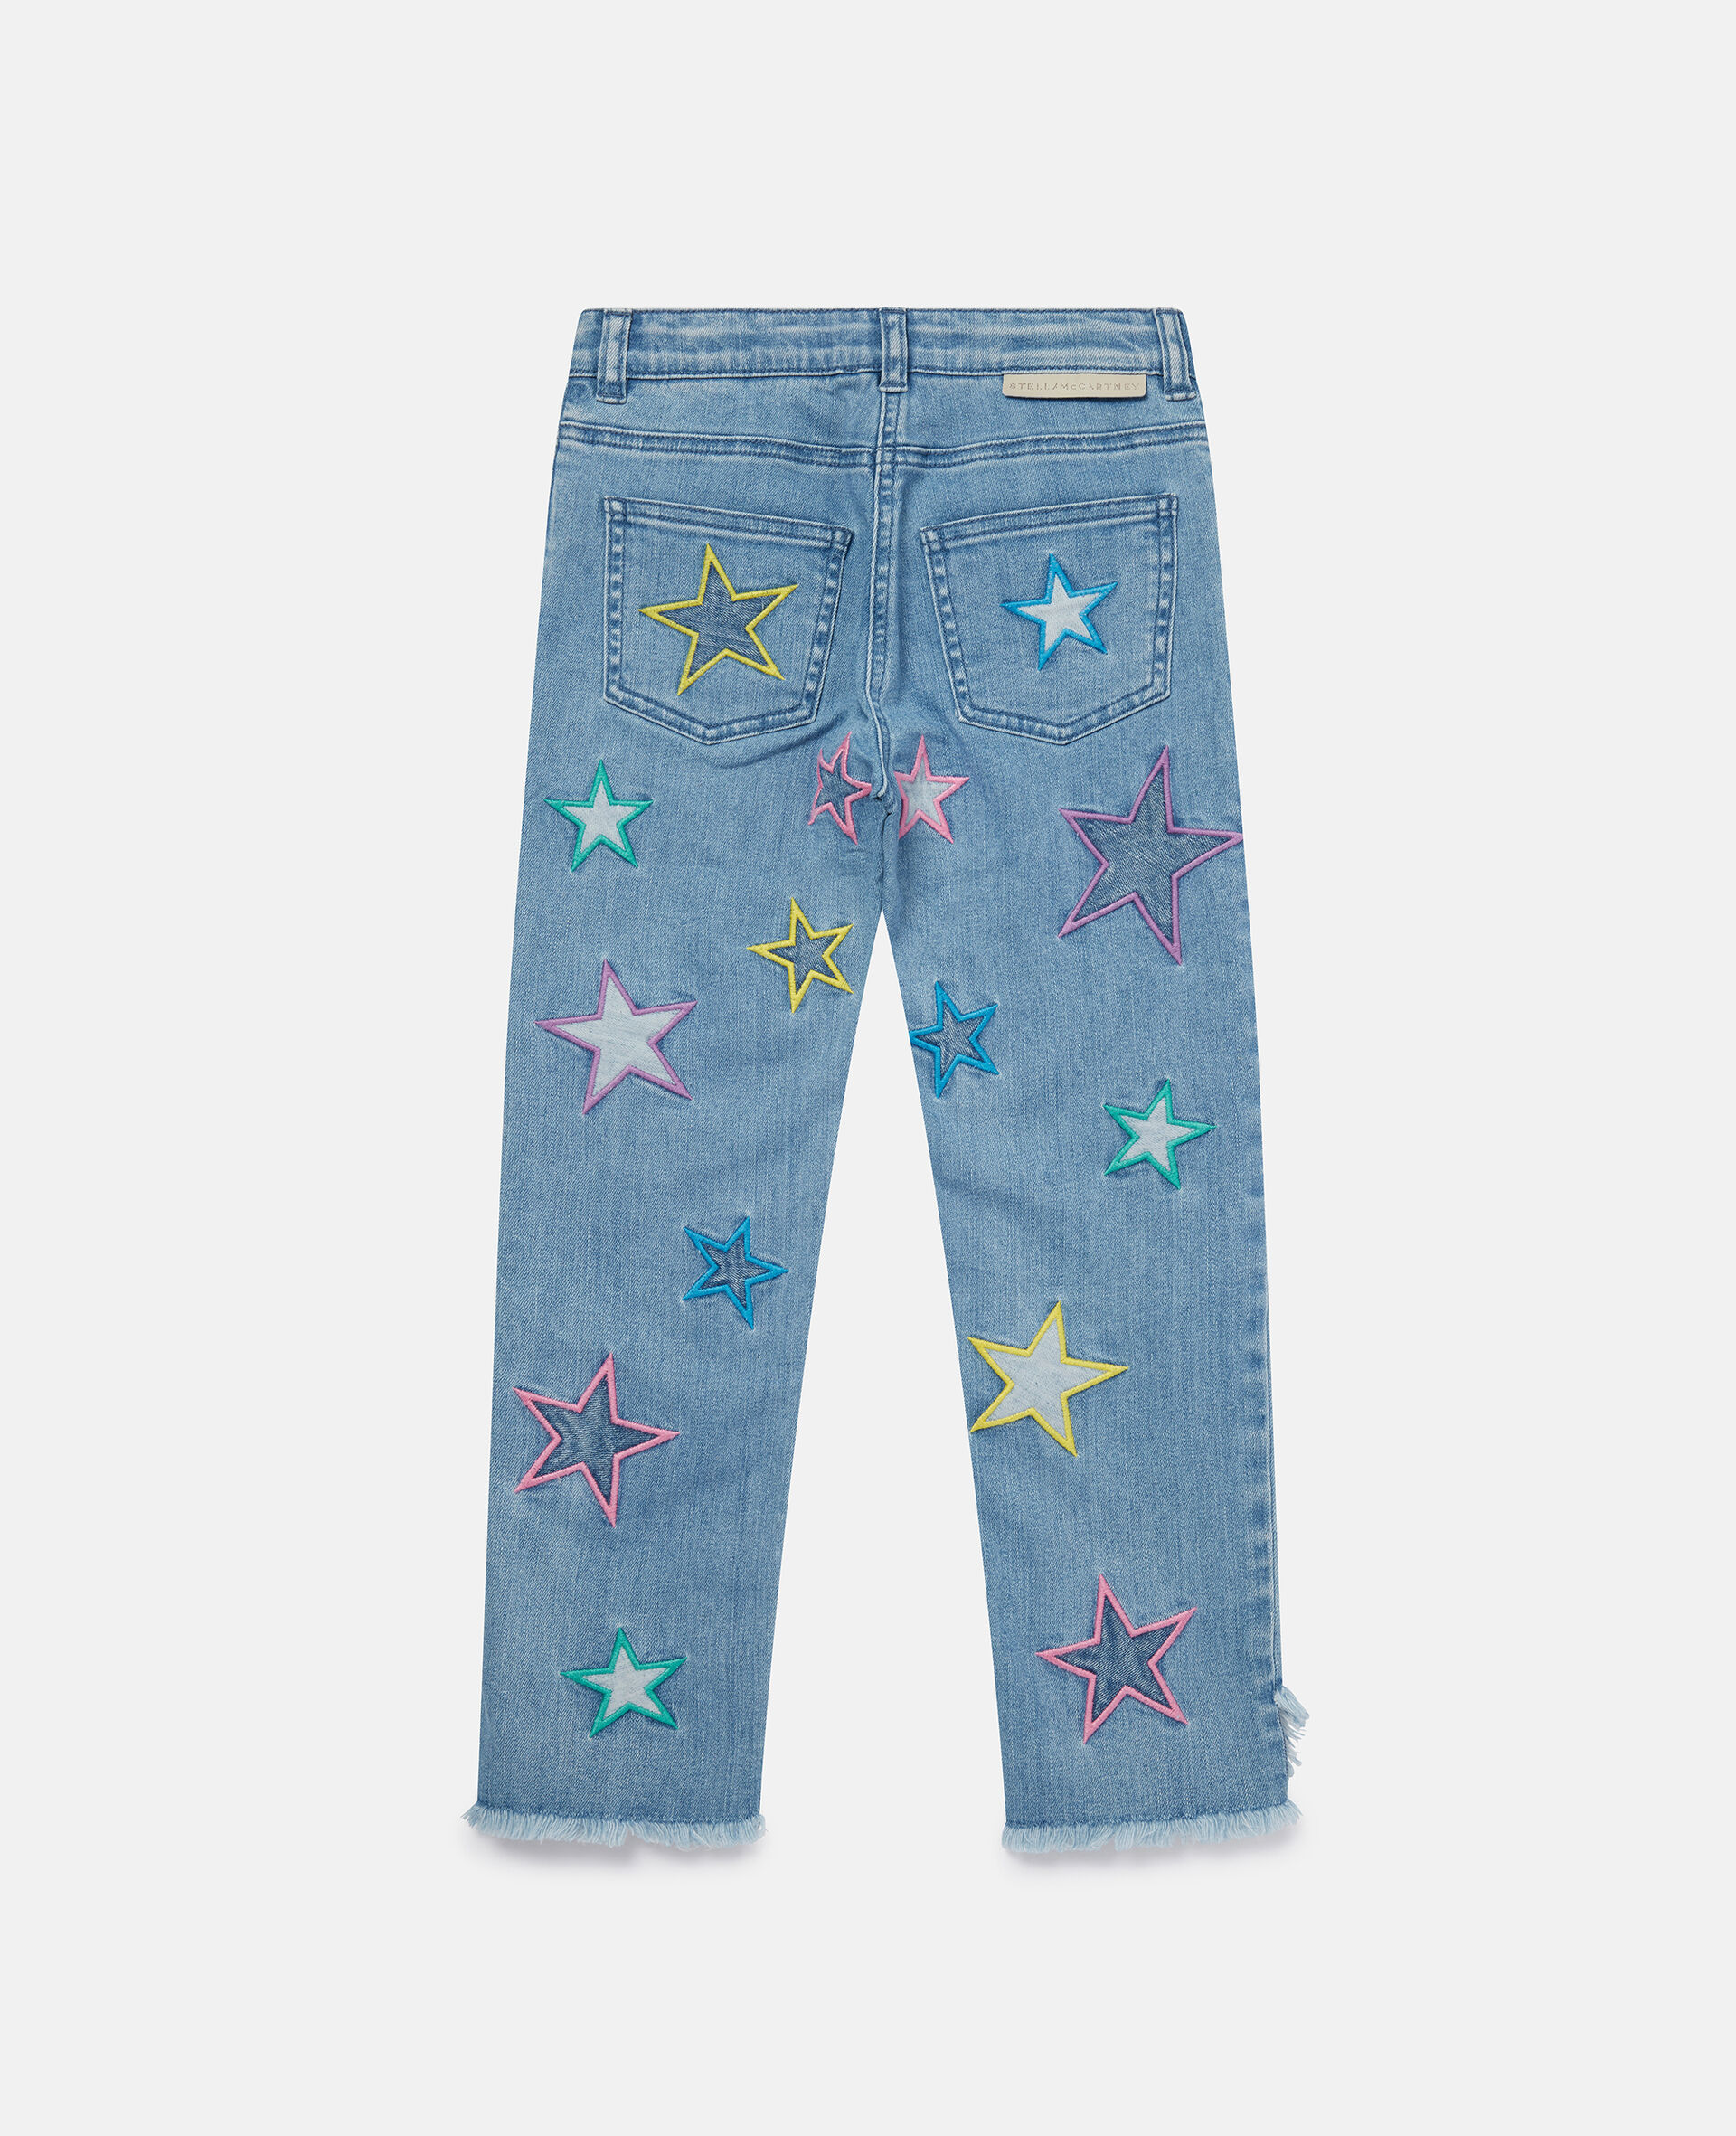 Embroidered Star Denim Trousers-Blue-large image number 2